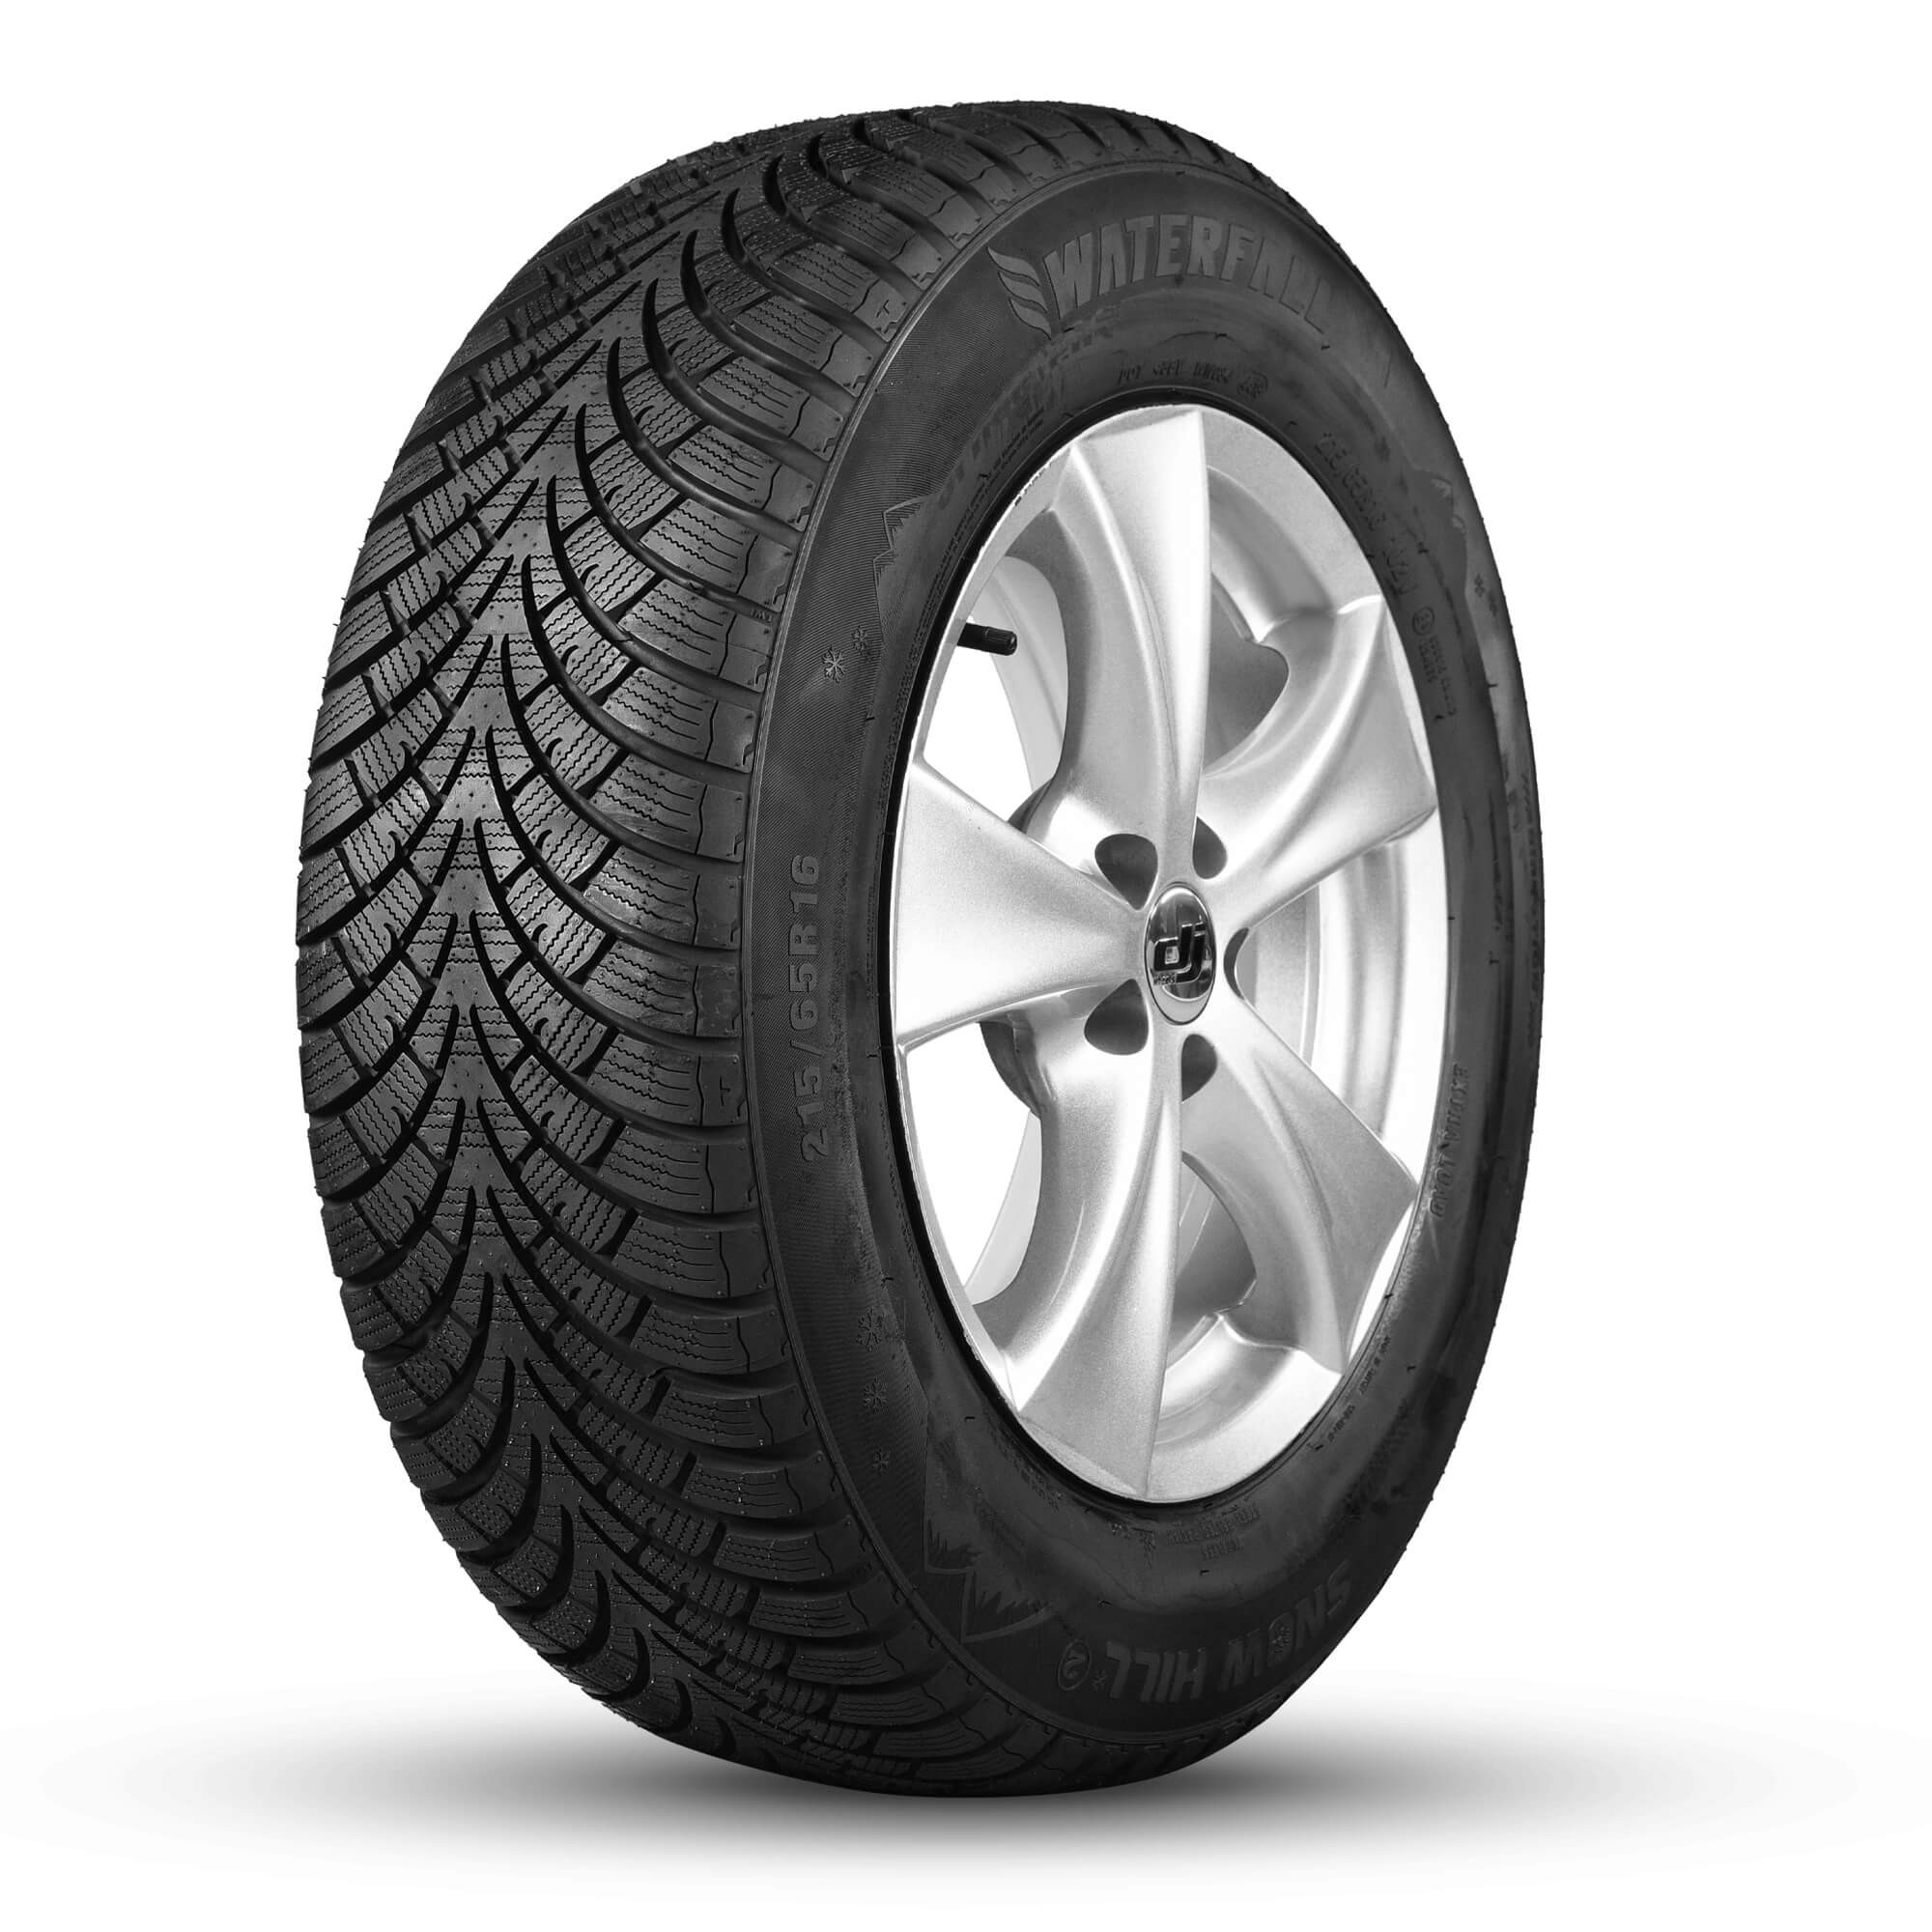 Gomme Nuove Waterfall 175/65 R14 86T SNOW HILL 3 M+S pneumatici nuovi Invernale